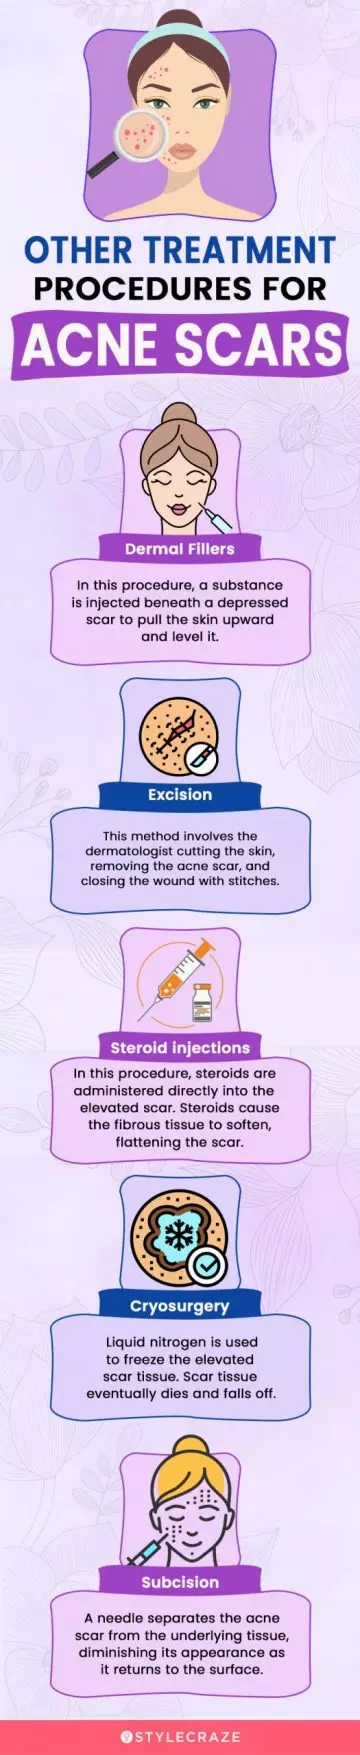 other treatment procedures for acne scars (infographic)